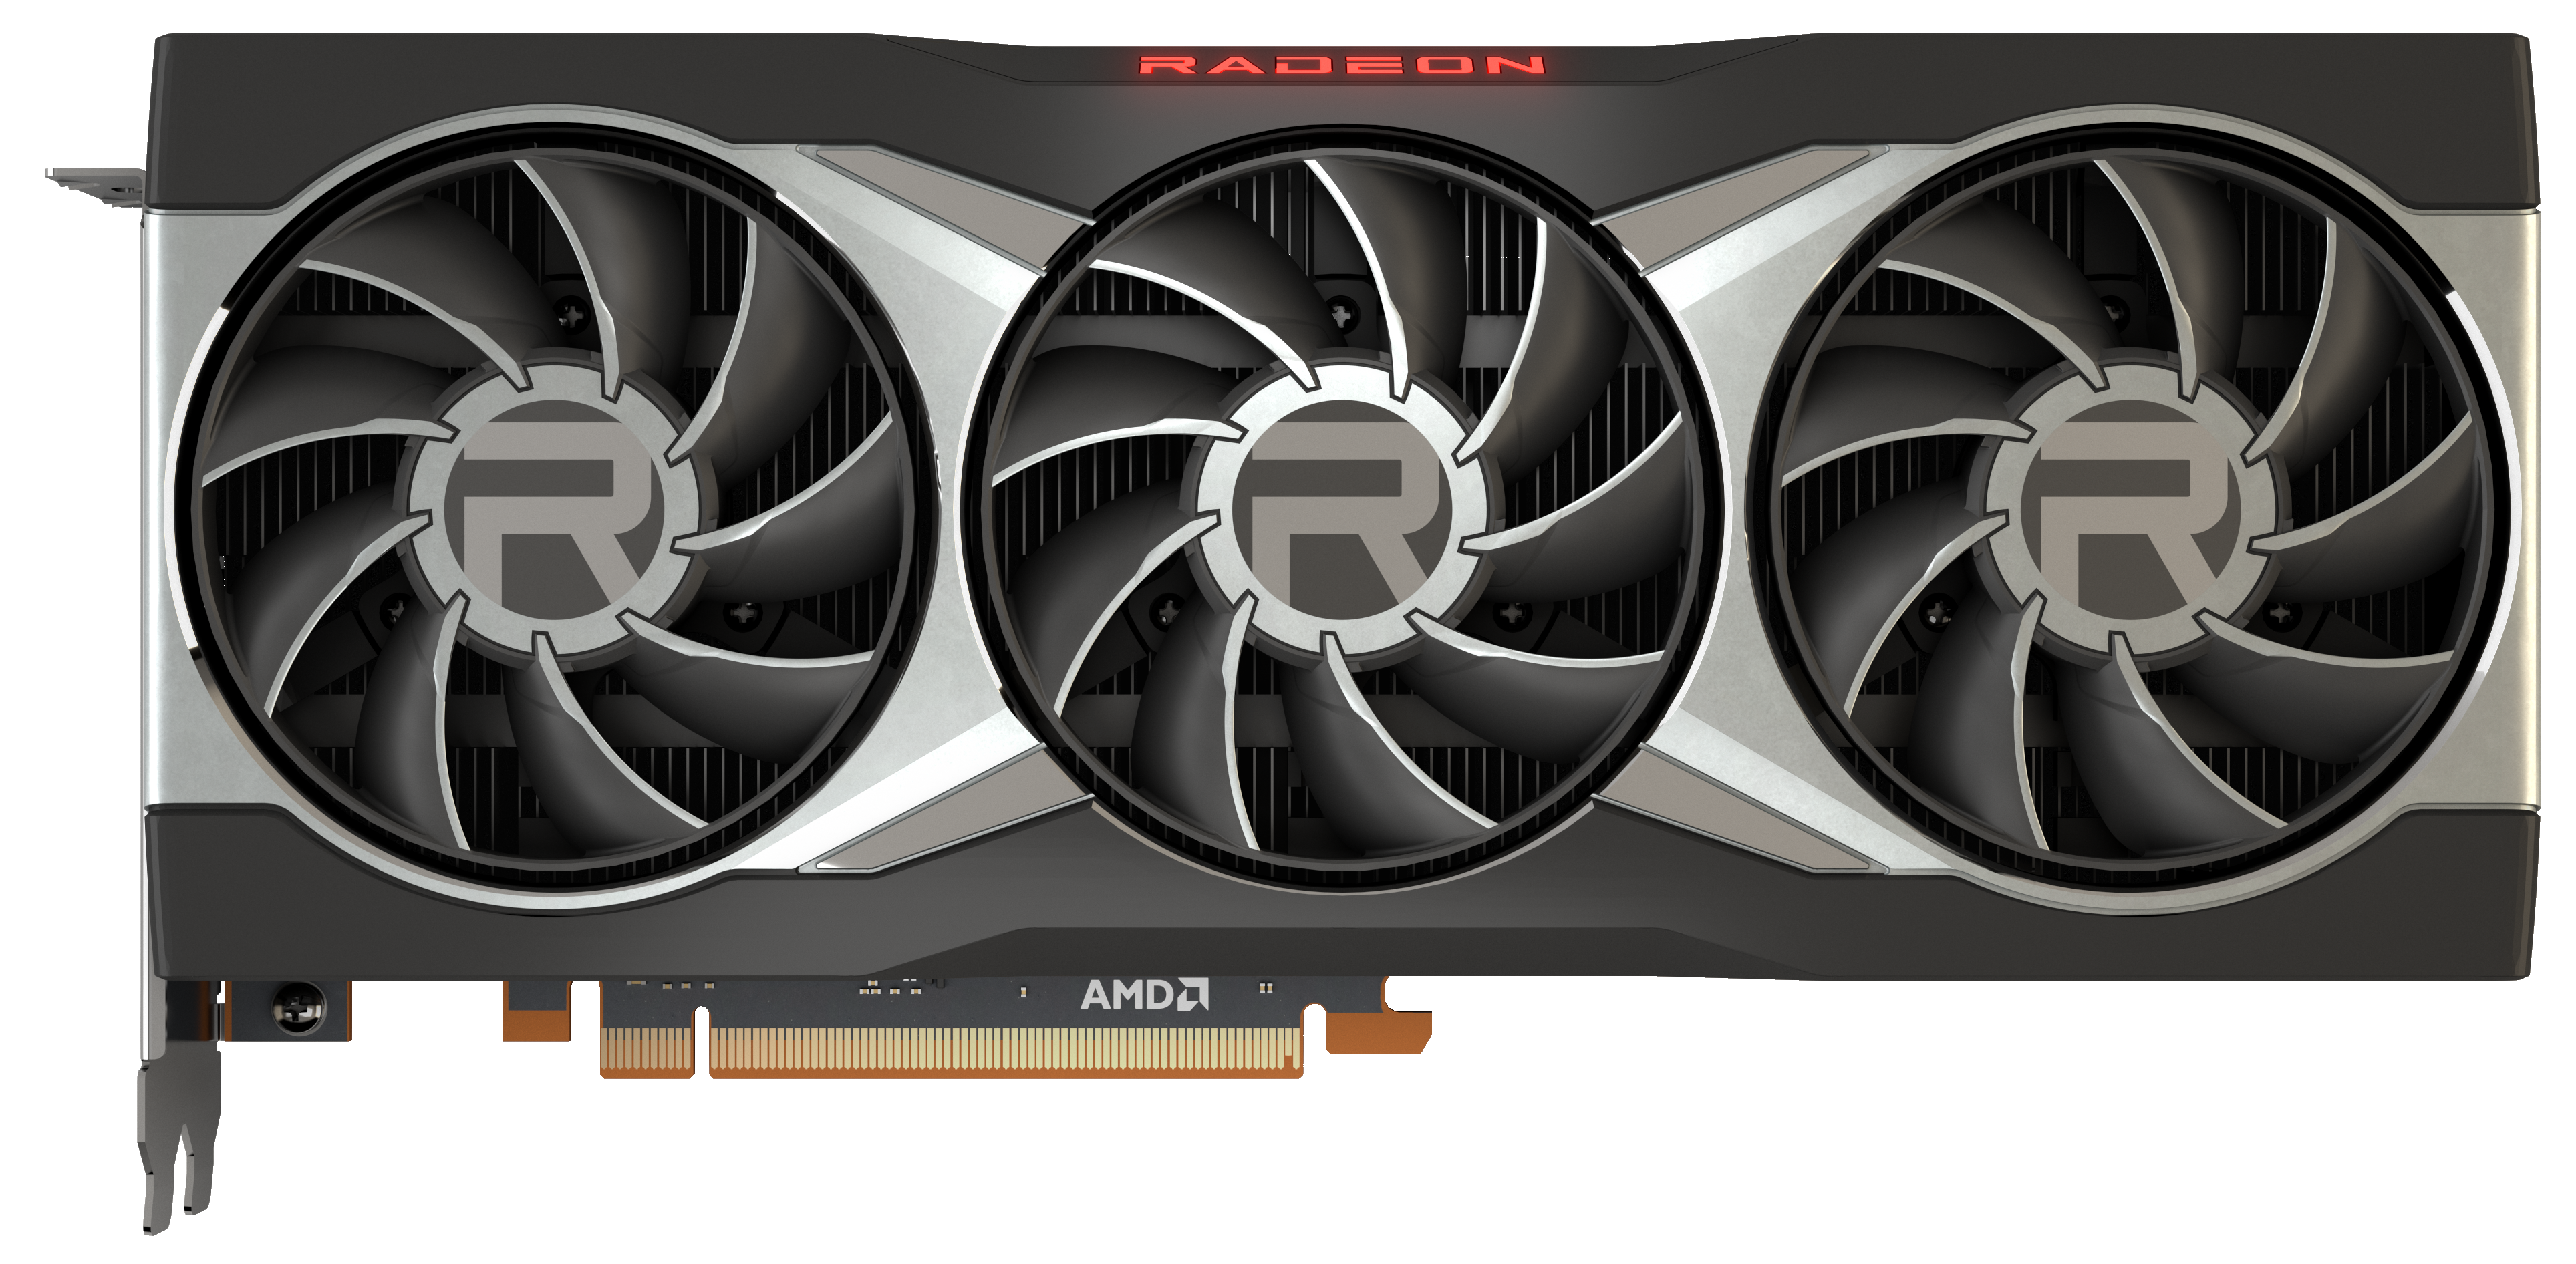 AMD Radeon RX 6800 XT review (Page 27)